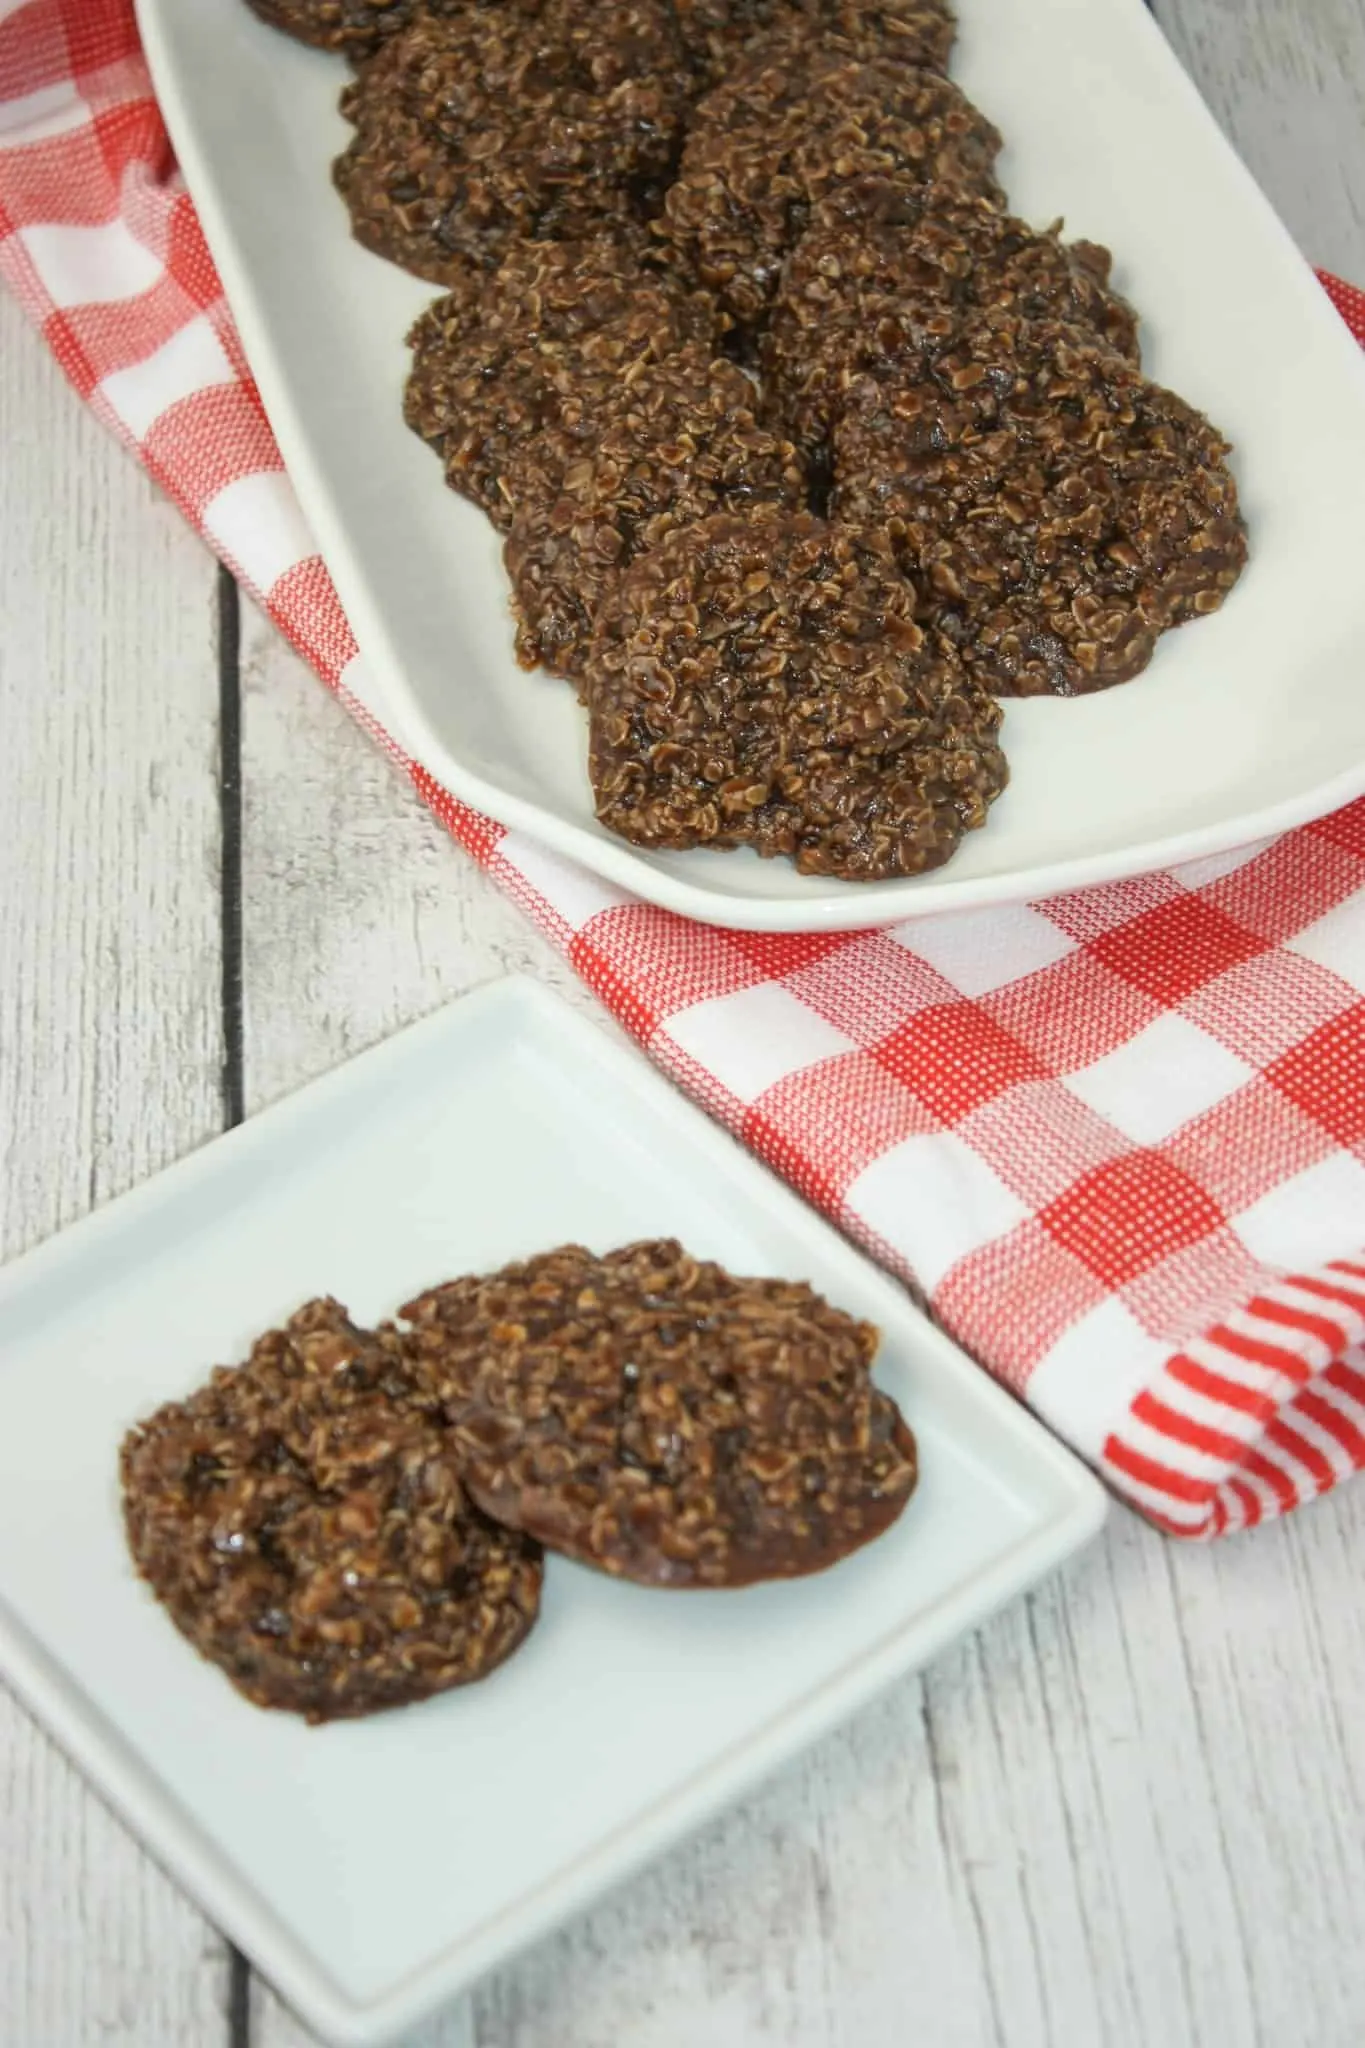 No Bake Chocolate Peanut Butter Cookies are a quick and easy dessert option.  This flavour combination is a favourite in our home.